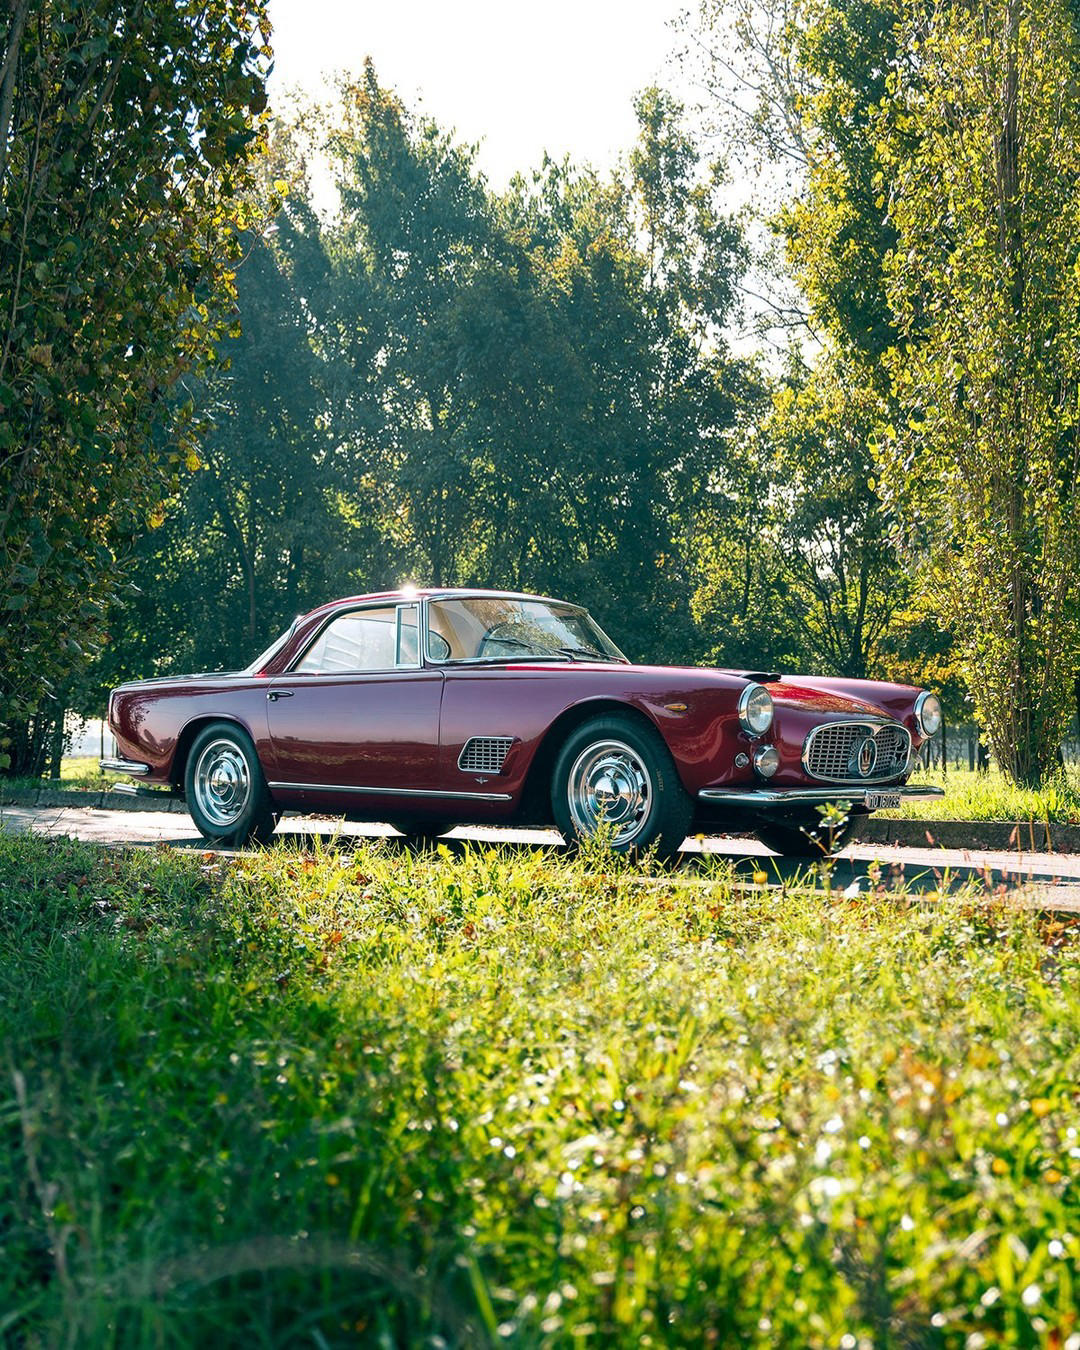 Maserati - Let your classic shine, just like this breathtaking 3500 GT